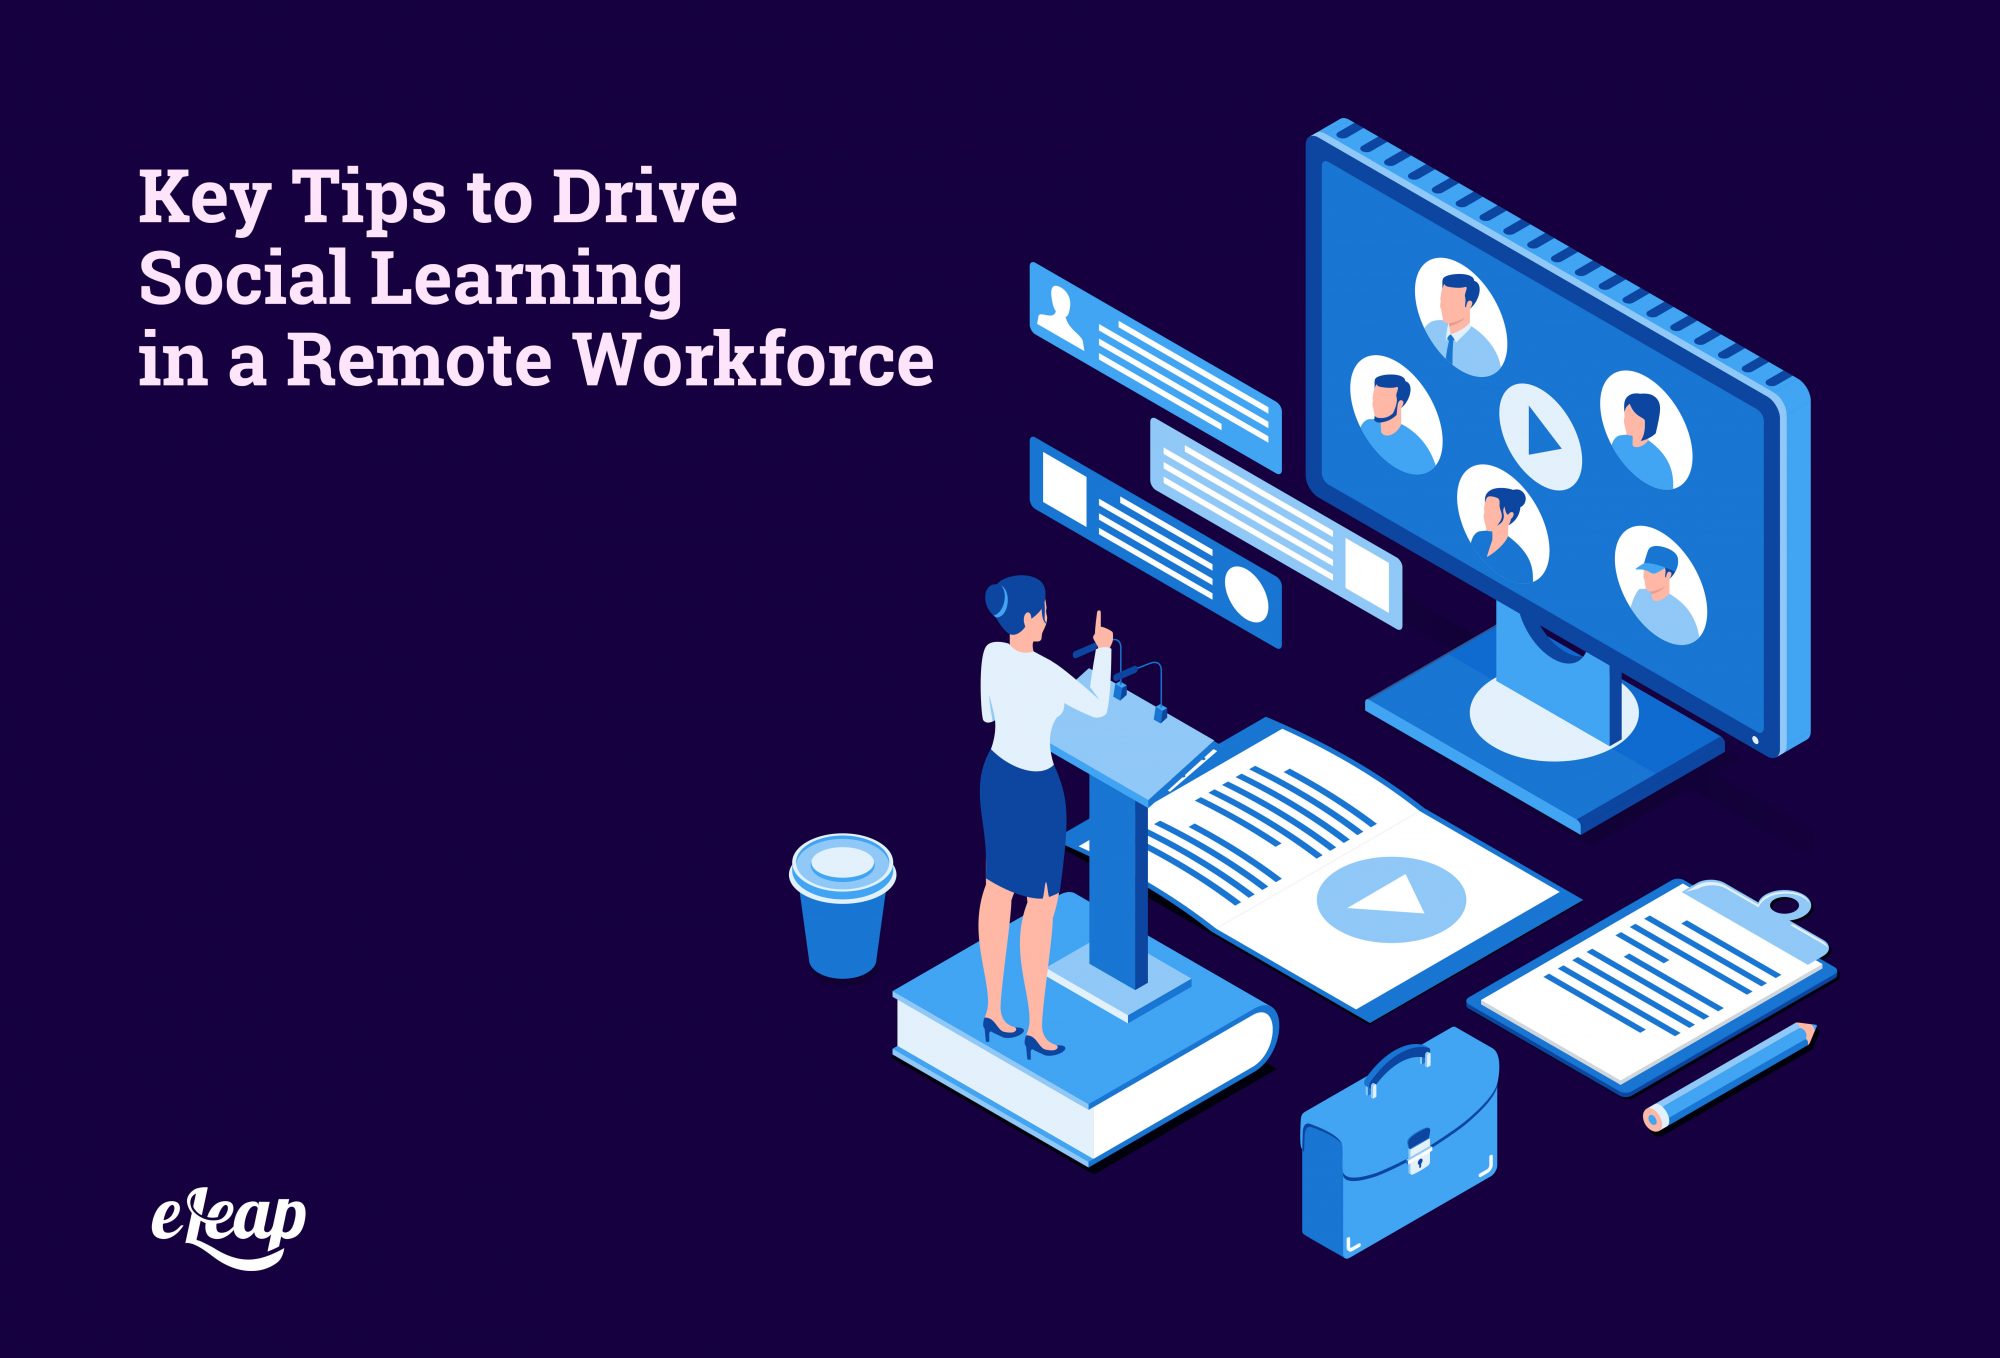 Key Tips to Drive Social Learning in a Remote Workforce